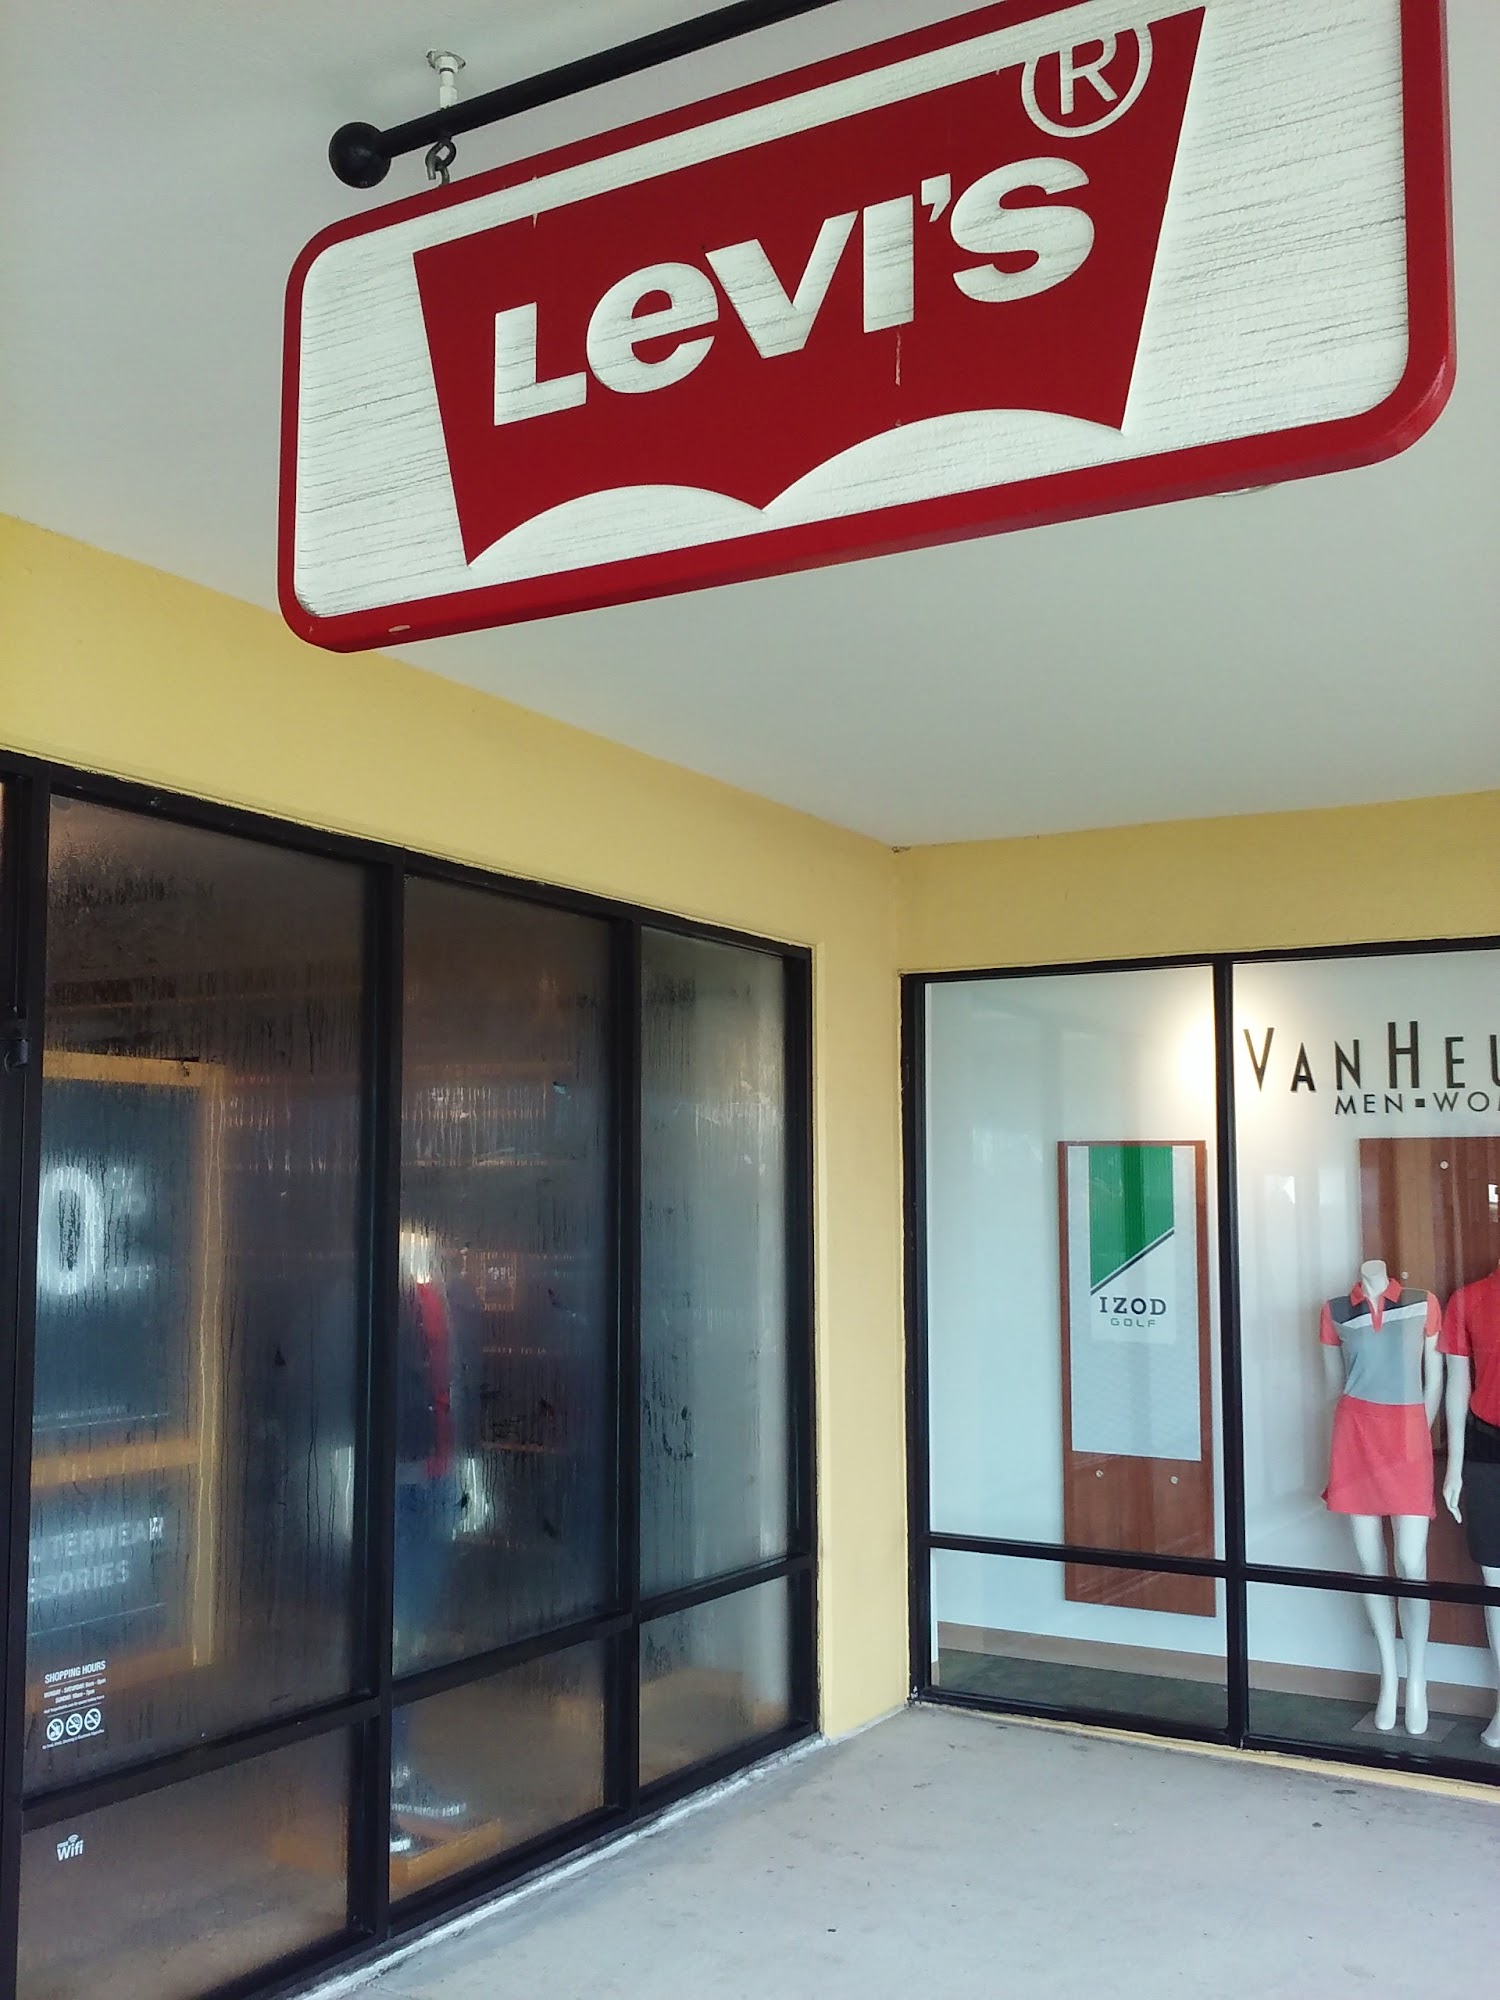 Levi’s Outlet Store